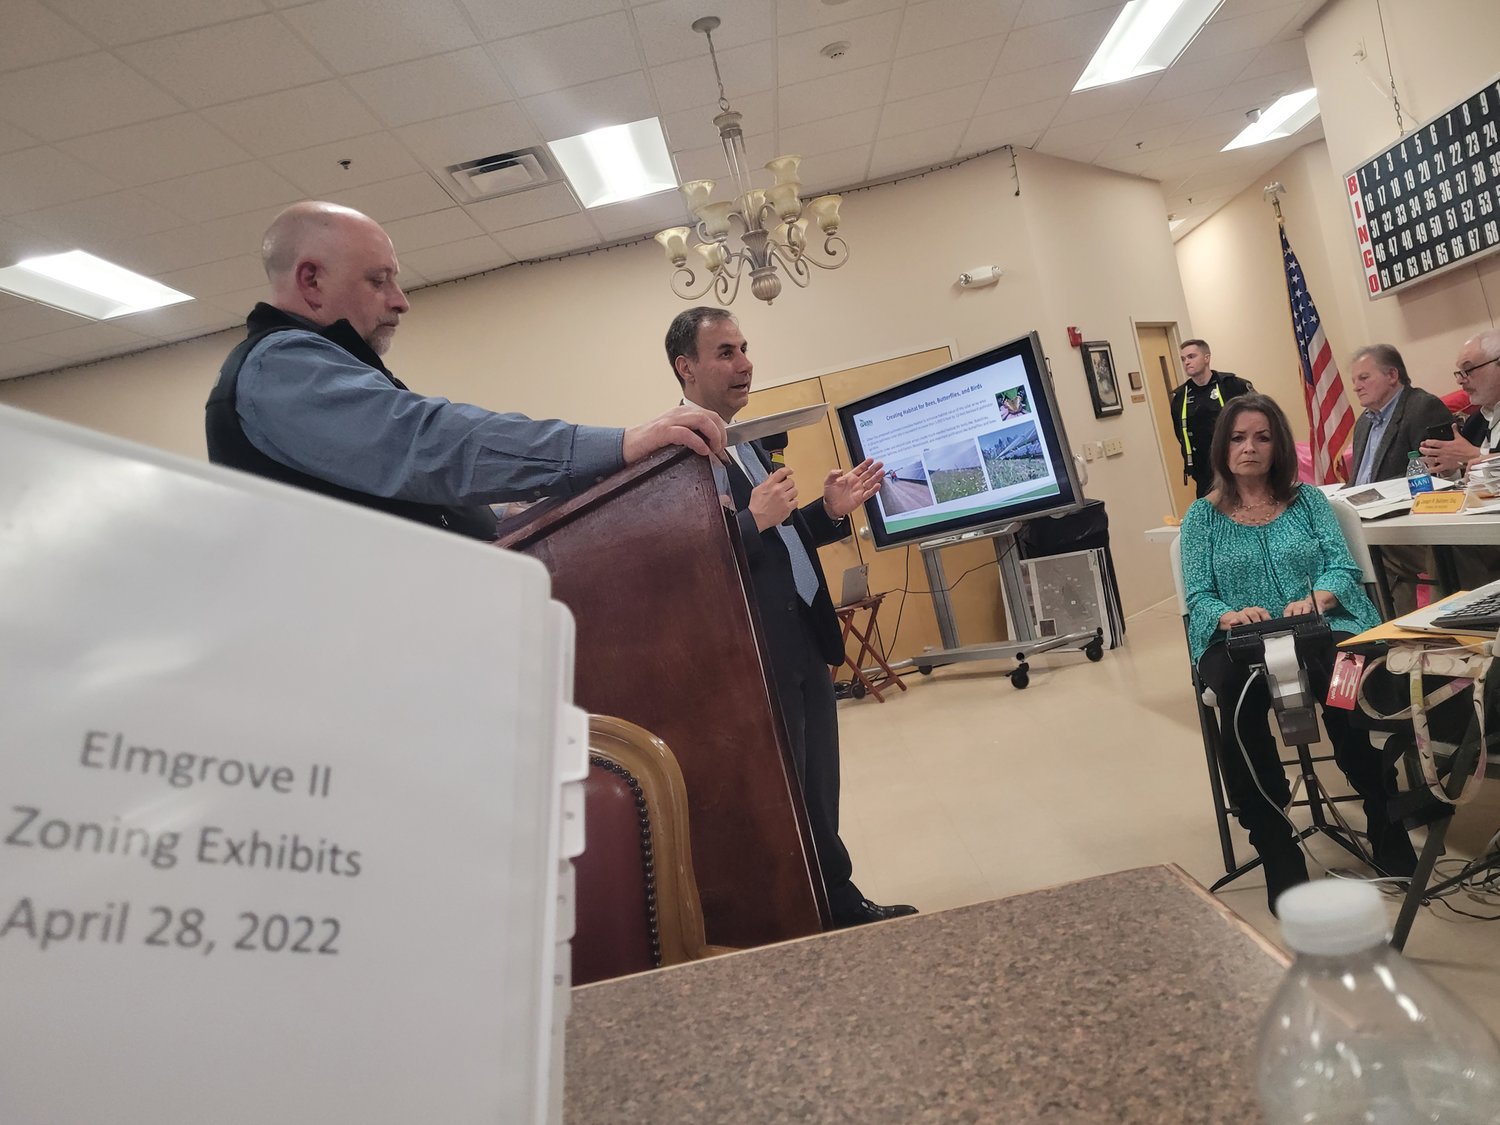 GREEN’S CASE: Kevin Morin, of Green Development, and their attorney, Joe Mancini, argued for solar field project special use permit approval before the Johnston Zoning Board at a public hearing on April 28, 2022.